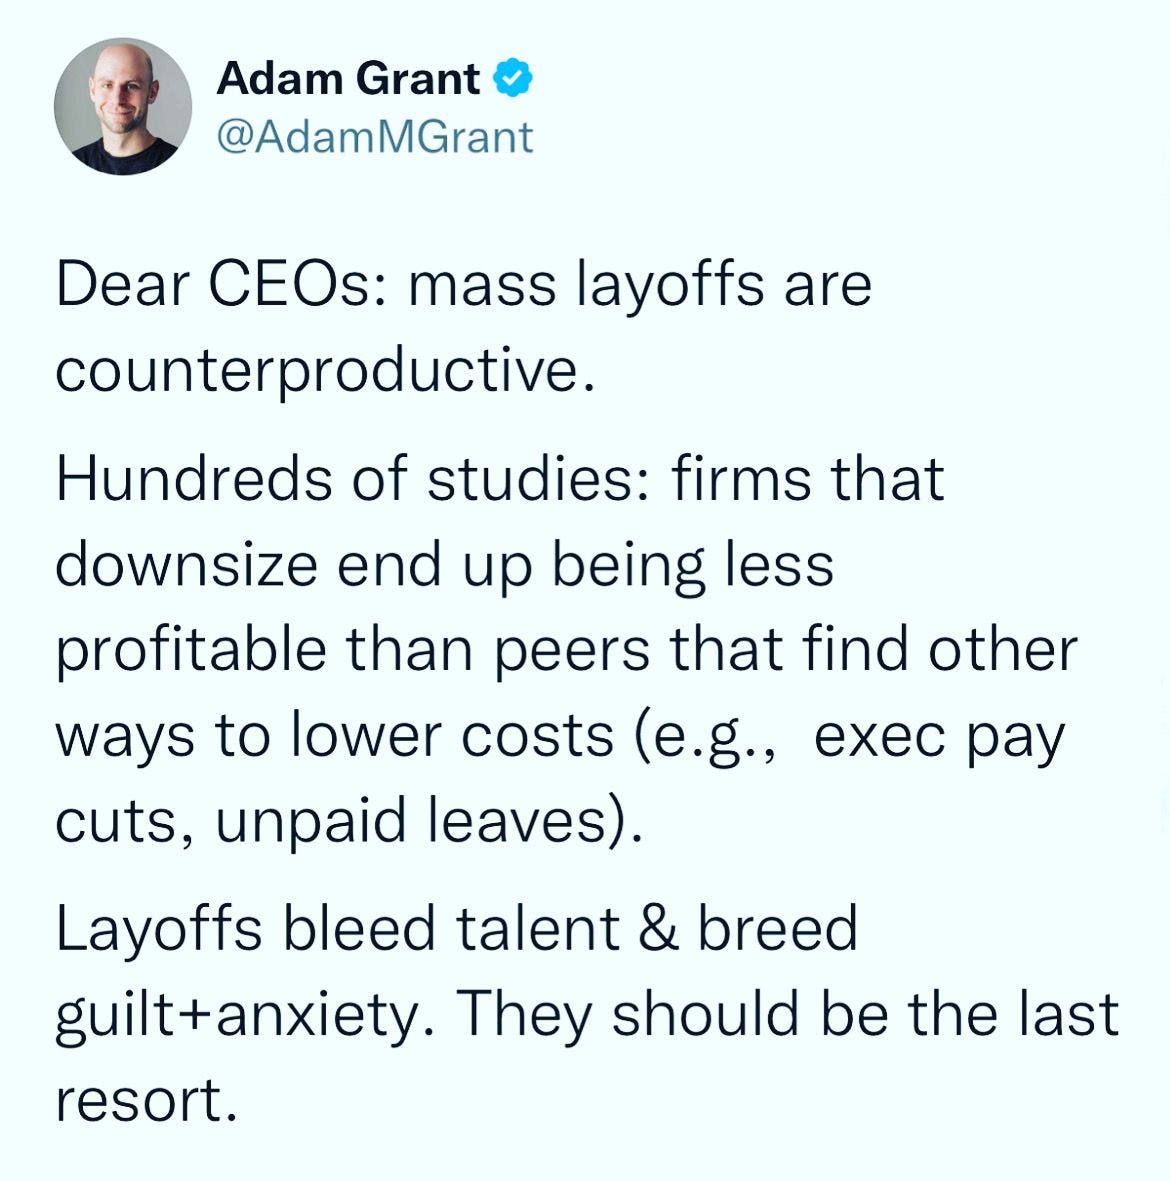 Dear CEOs: mass layoffs are counterproductive.

Hundreds of studies: firms that downsize end up being less profitable than peers that find other ways to lower costs (e.g.,  exec pay cuts, unpaid leaves).

Layoffs bleed talent & breed guilt+anxiety. They should be the last resort. 